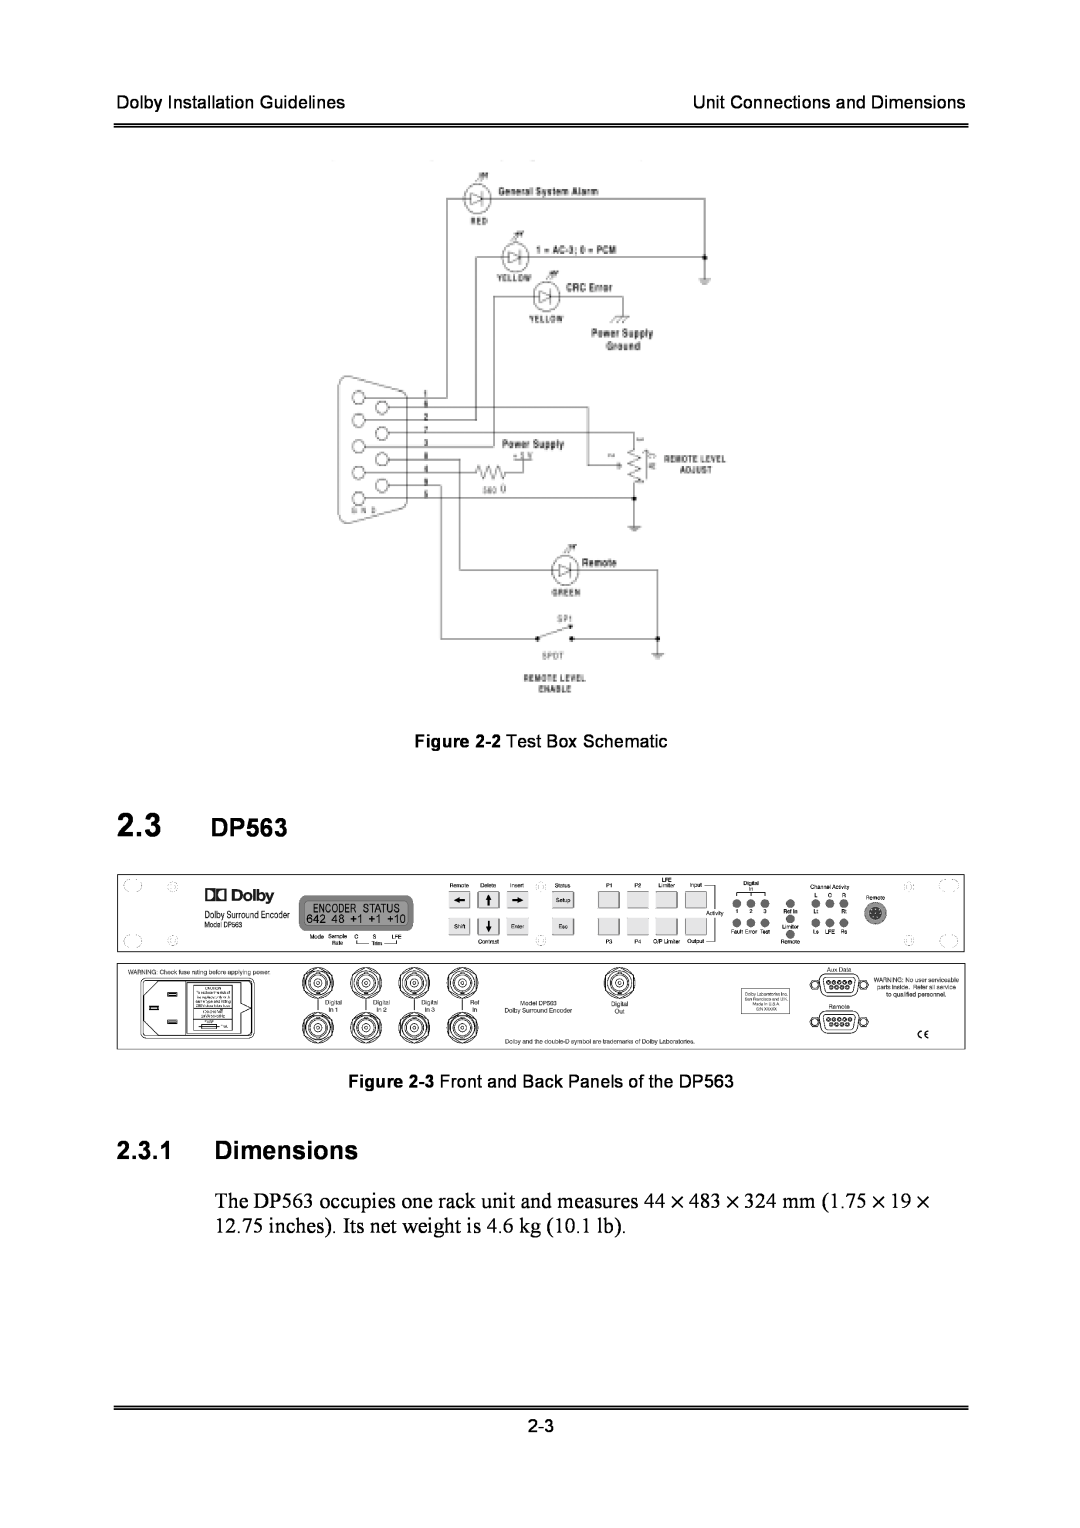 Dolby Laboratories S01/13621 2.3 DP563, 2.3.1Dimensions, Dolby Installation Guidelines, Unit Connections and Dimensions 